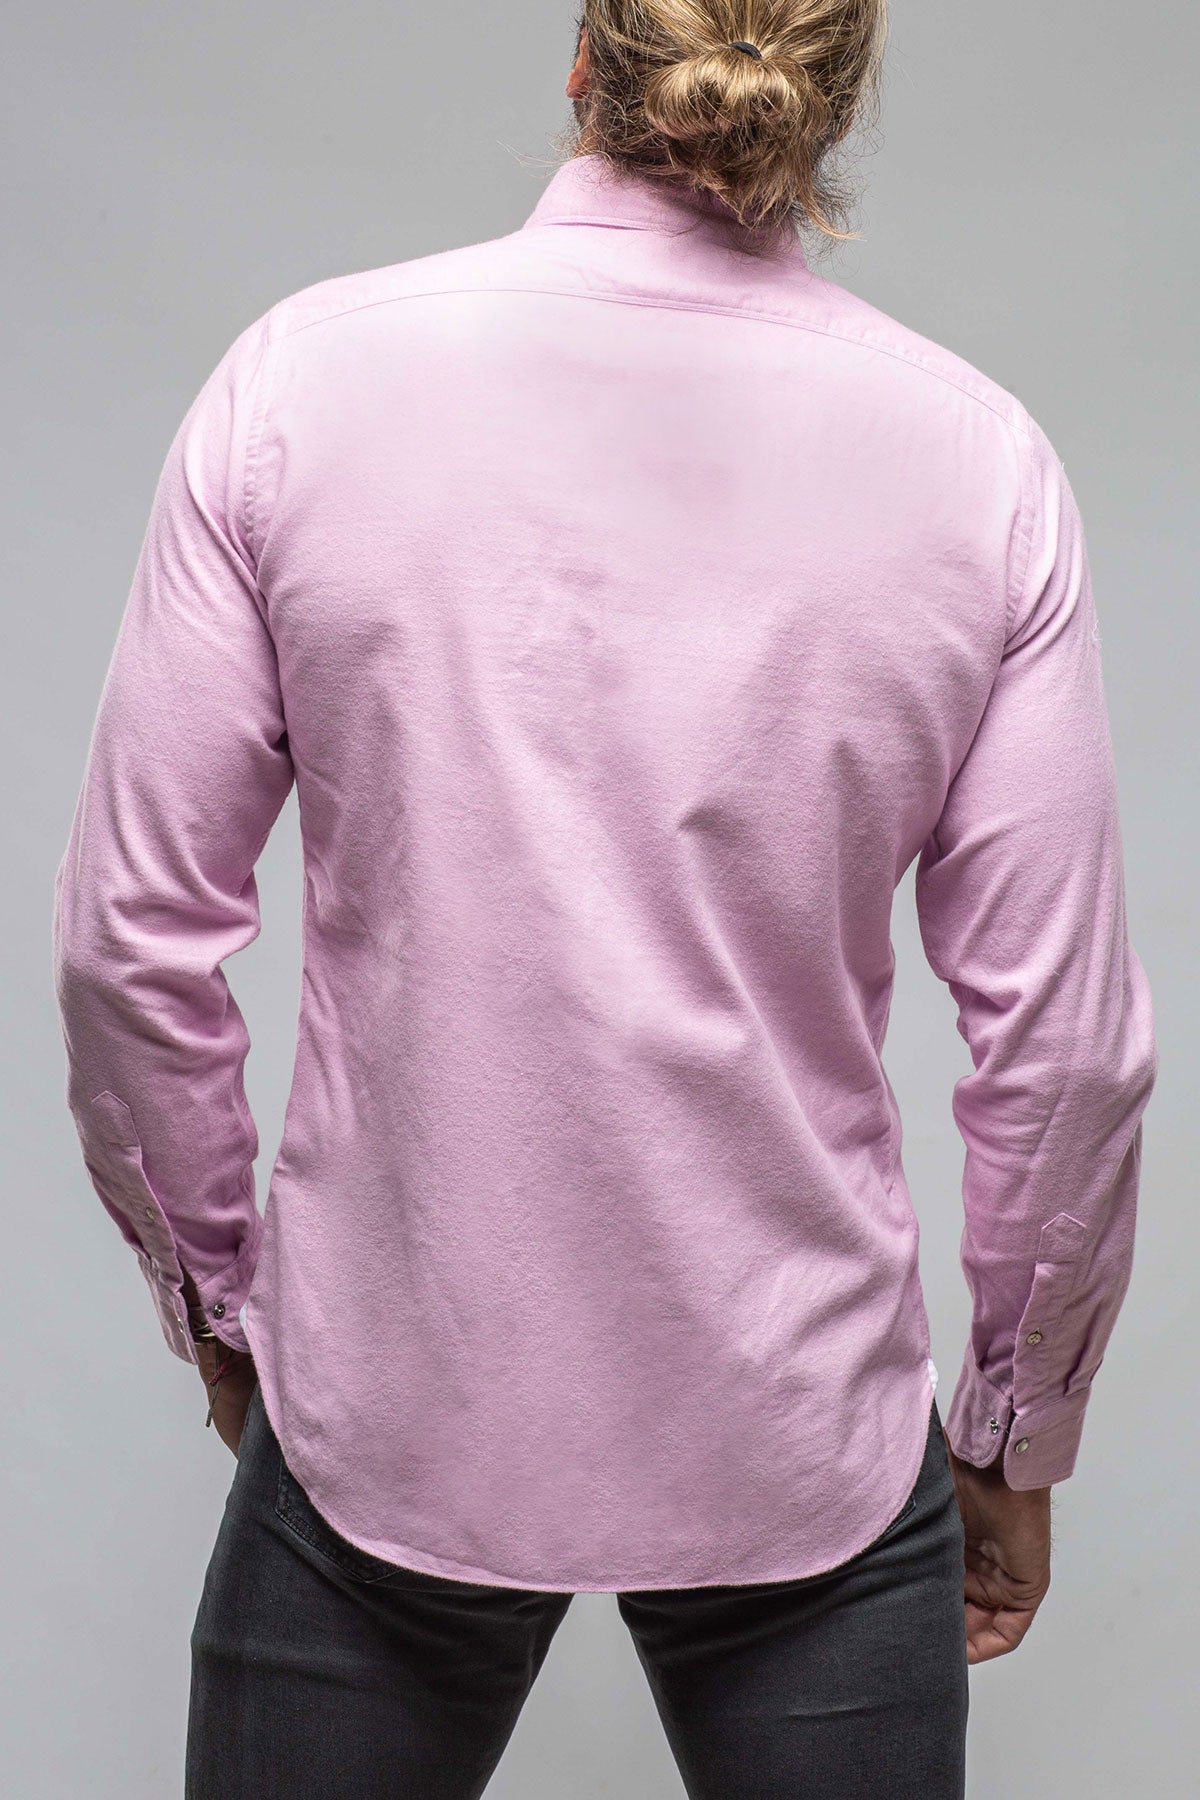 Wayne Western Snap Shirt In Pink | Mens - Shirts - Outpost | Giannetto Portofino